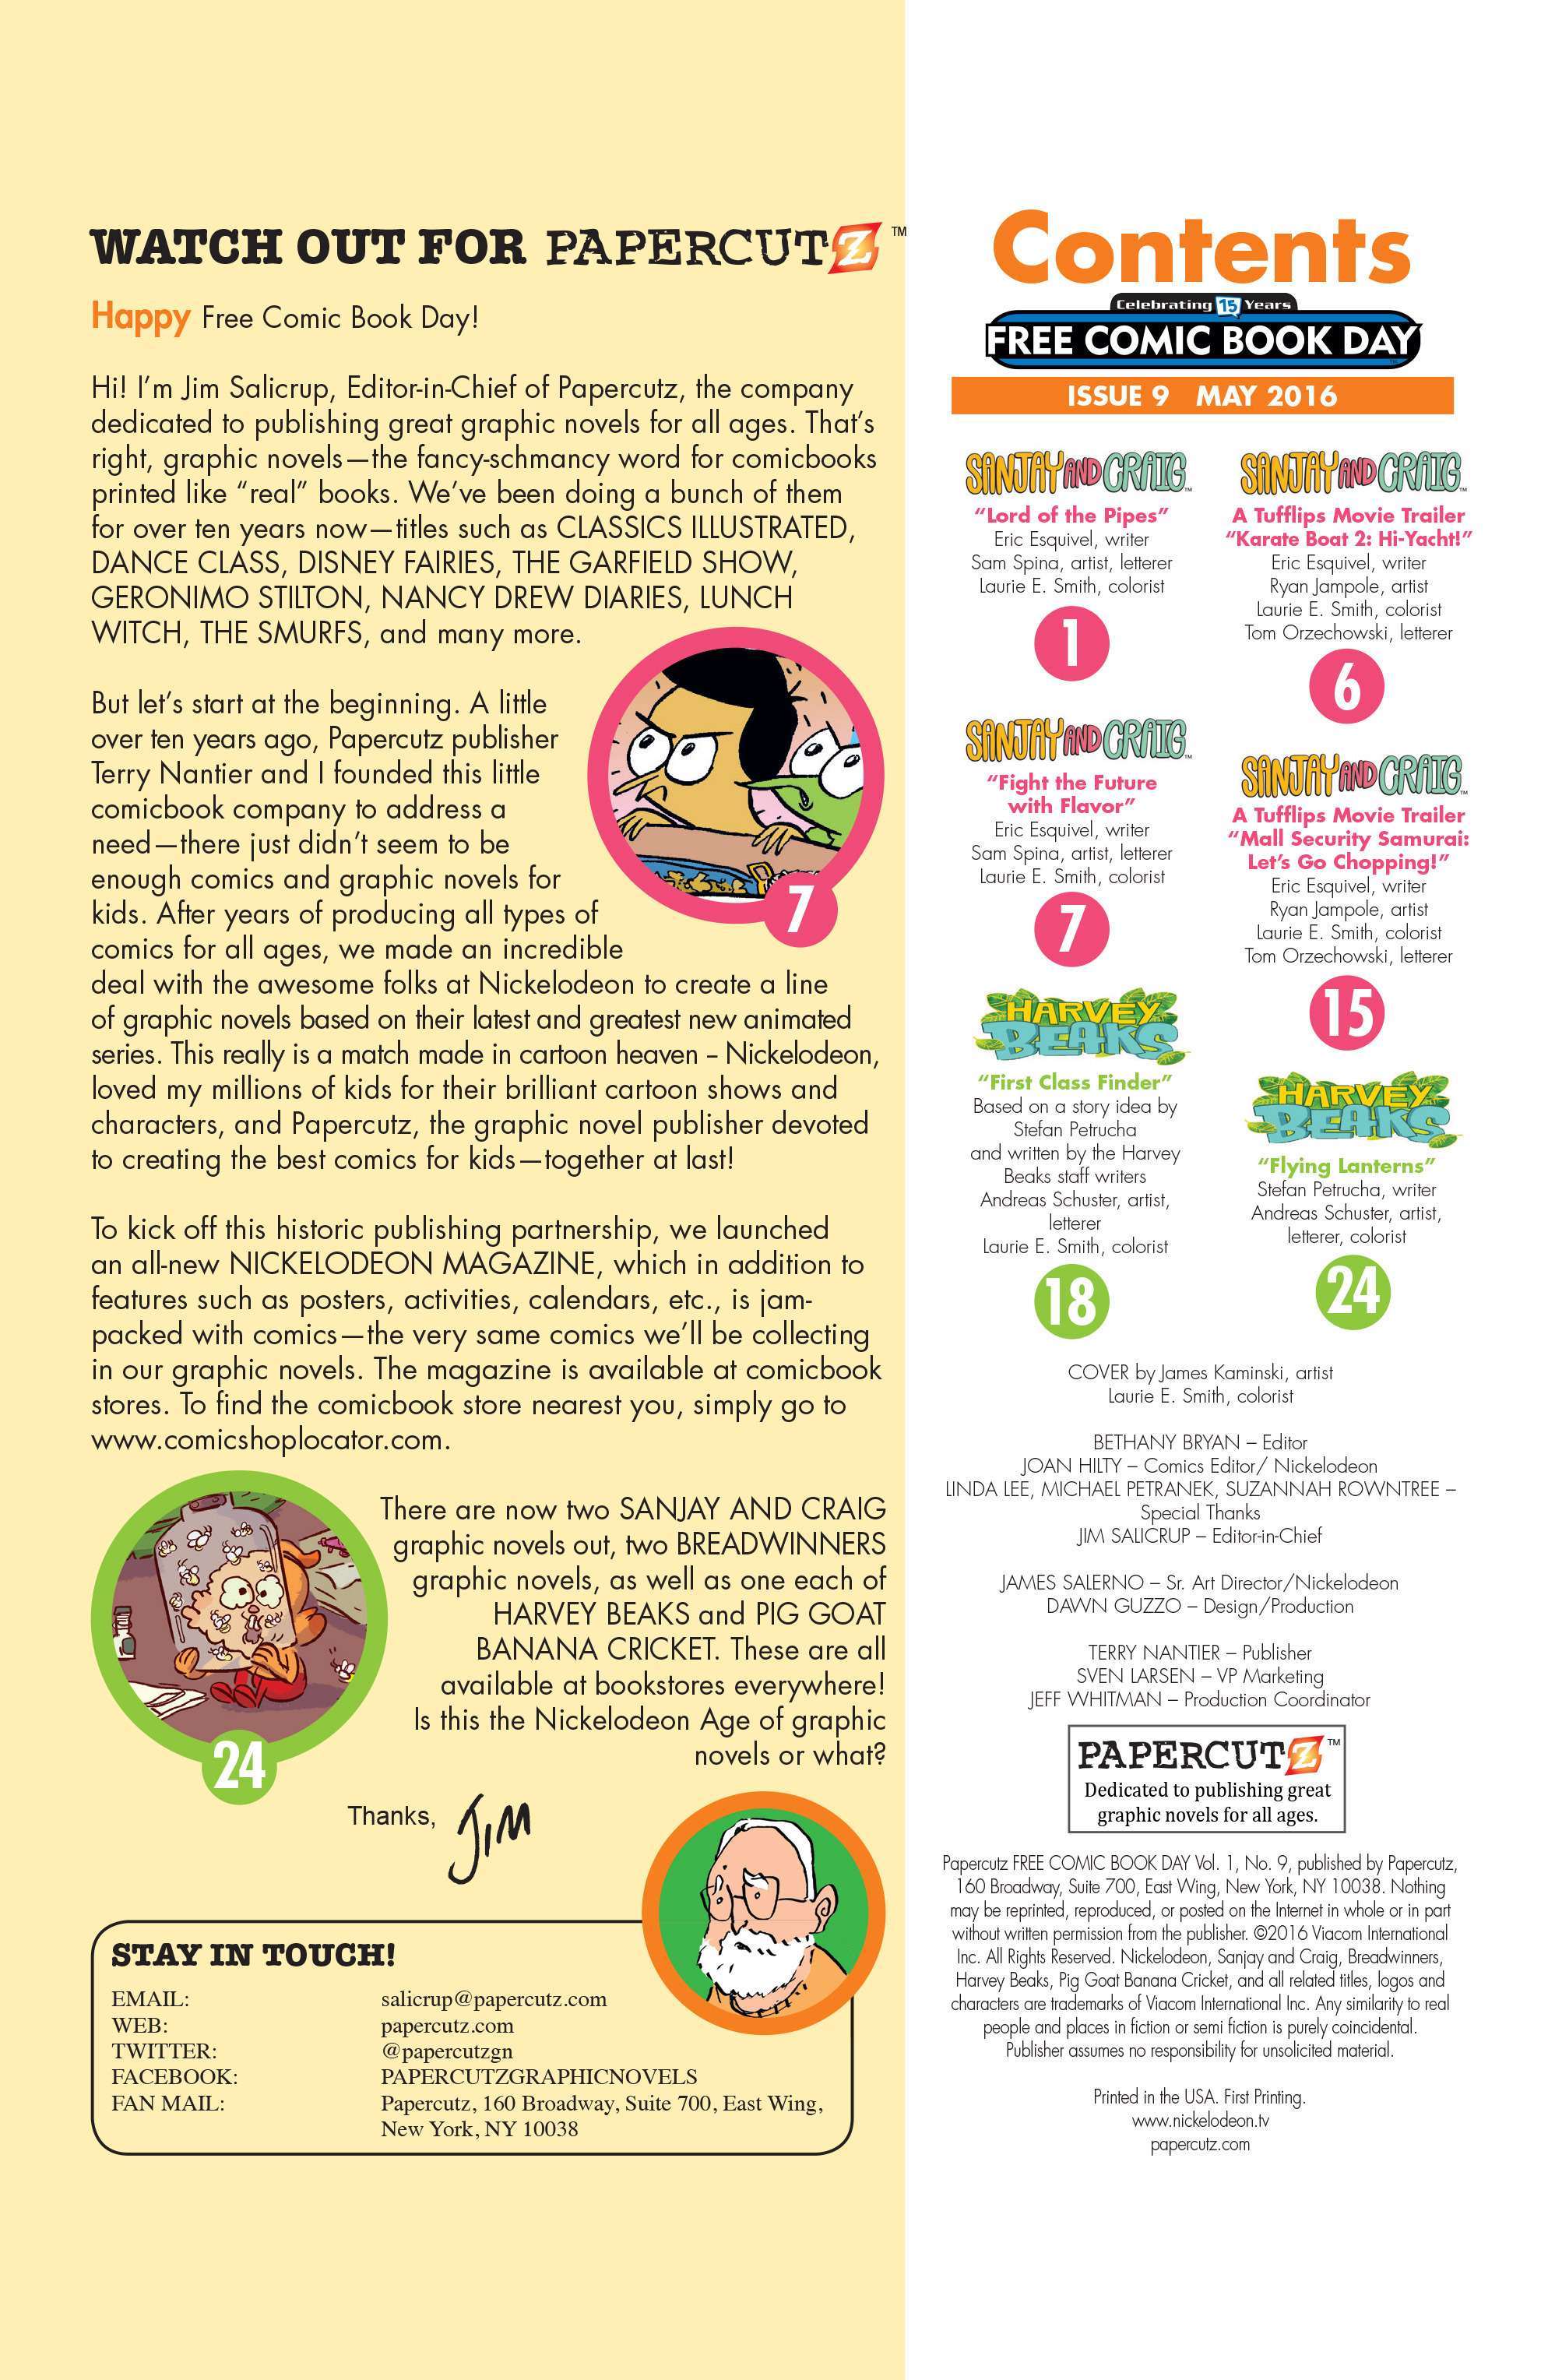 Read online Free Comic Book Day 2016 comic -  Issue # Sanjay and Craig-Harvey Beaks - 2